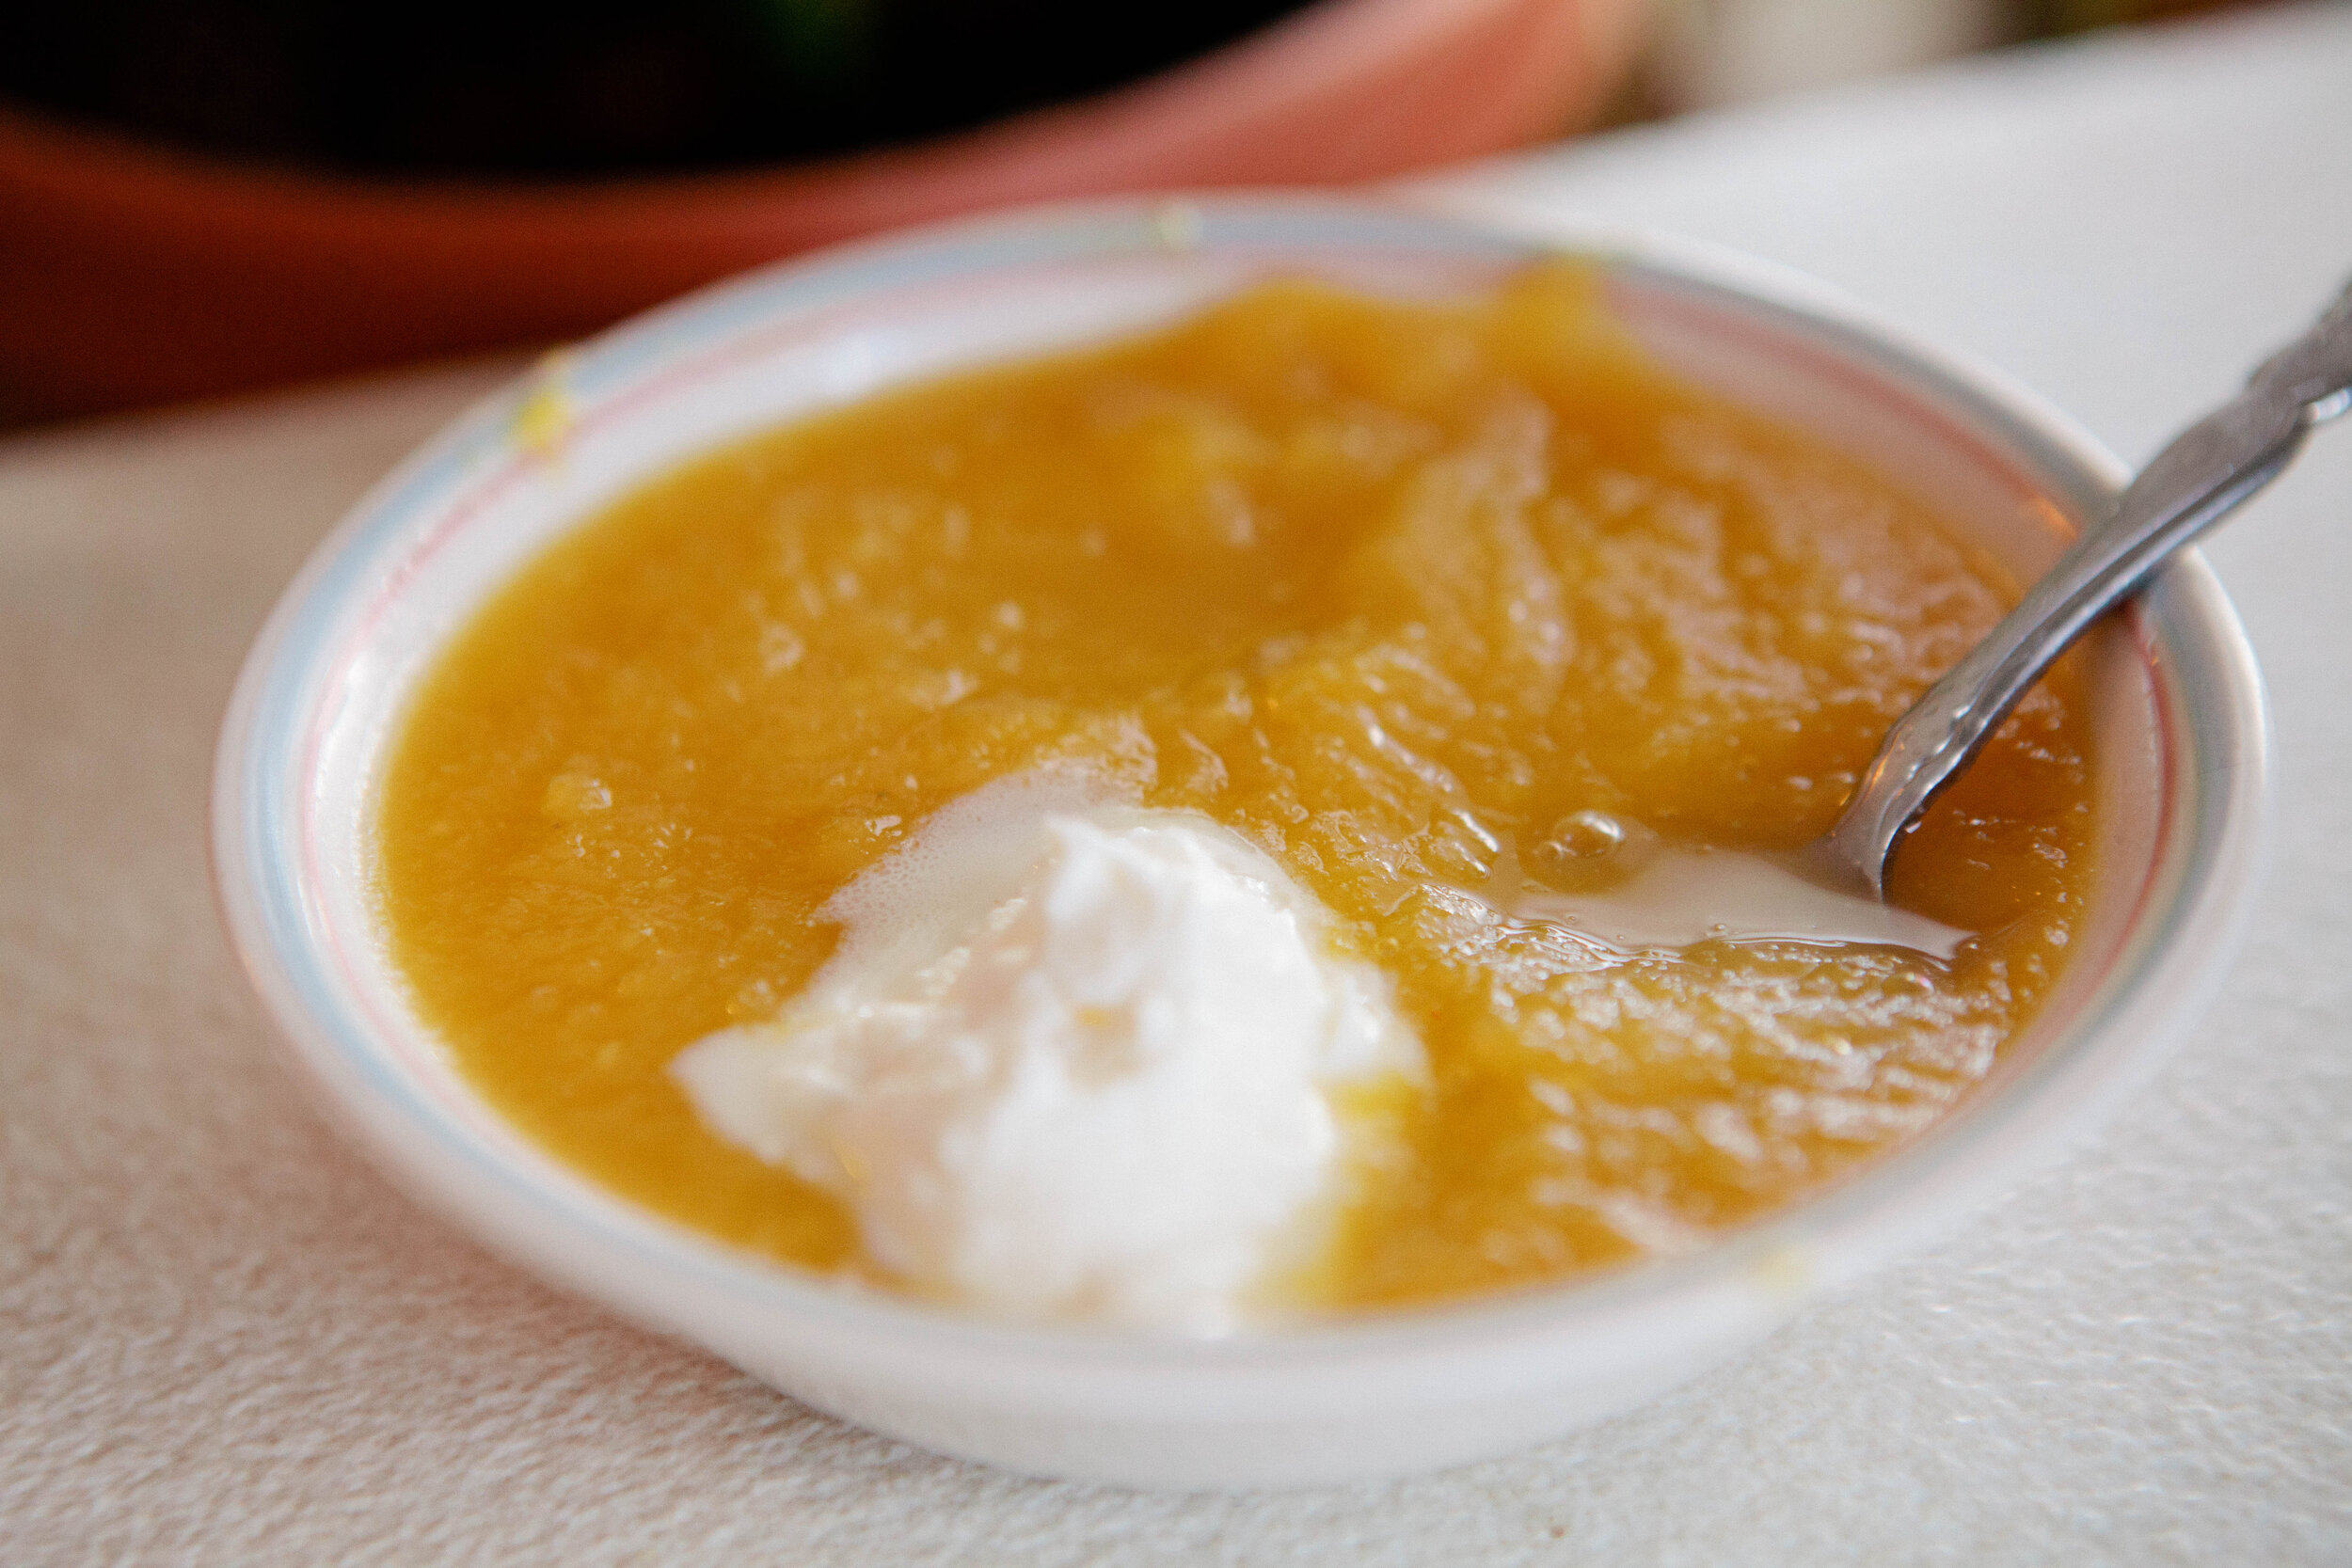 Pumpkin puree soup is GAPS Legal and very warm and filling. It freezes well so it’s great to meal prep with. See more ideas for how to meal prep on the GAPS Diet. Recipes by Amy Mihaly, Certified GAPS Practitioner in Colorado.